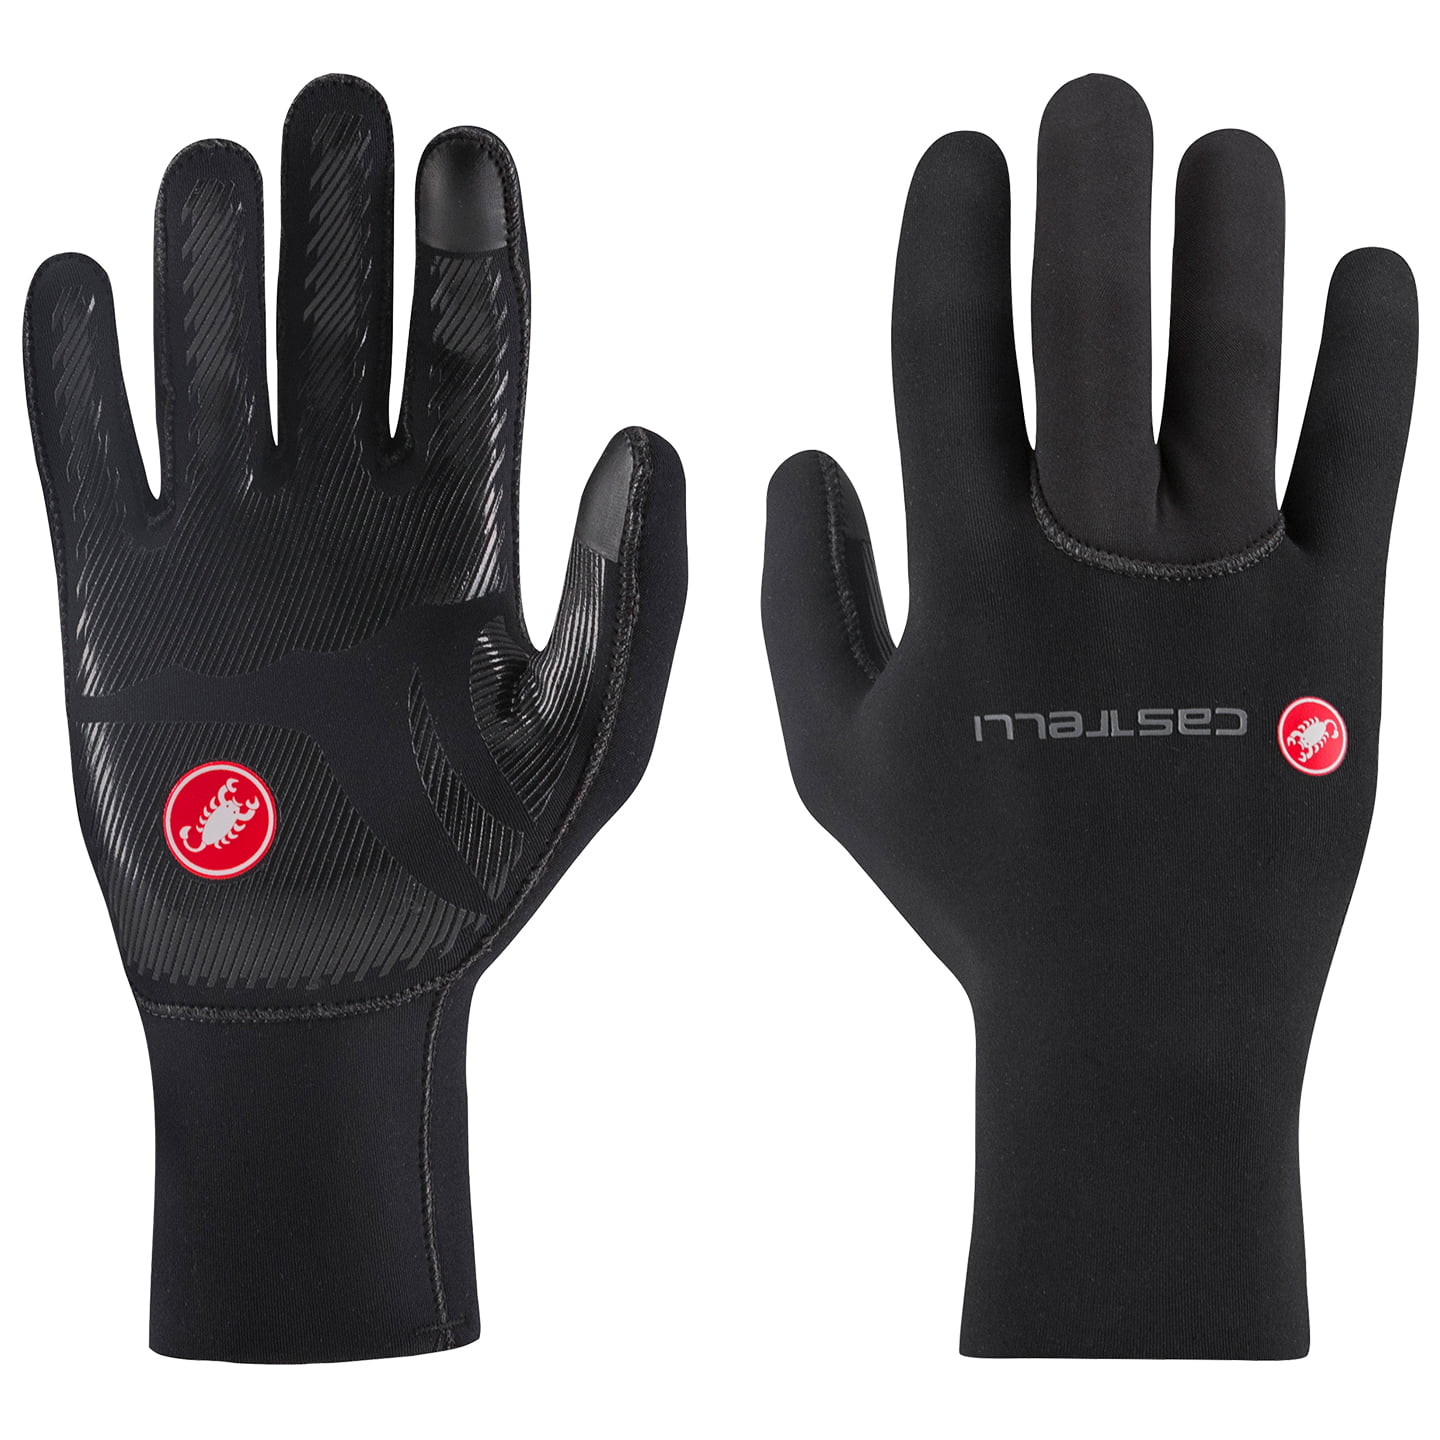 CASTELLI Winter Gloves Diluvio One Winter Cycling Gloves, for men, size L, Cycling gloves, Bike gear